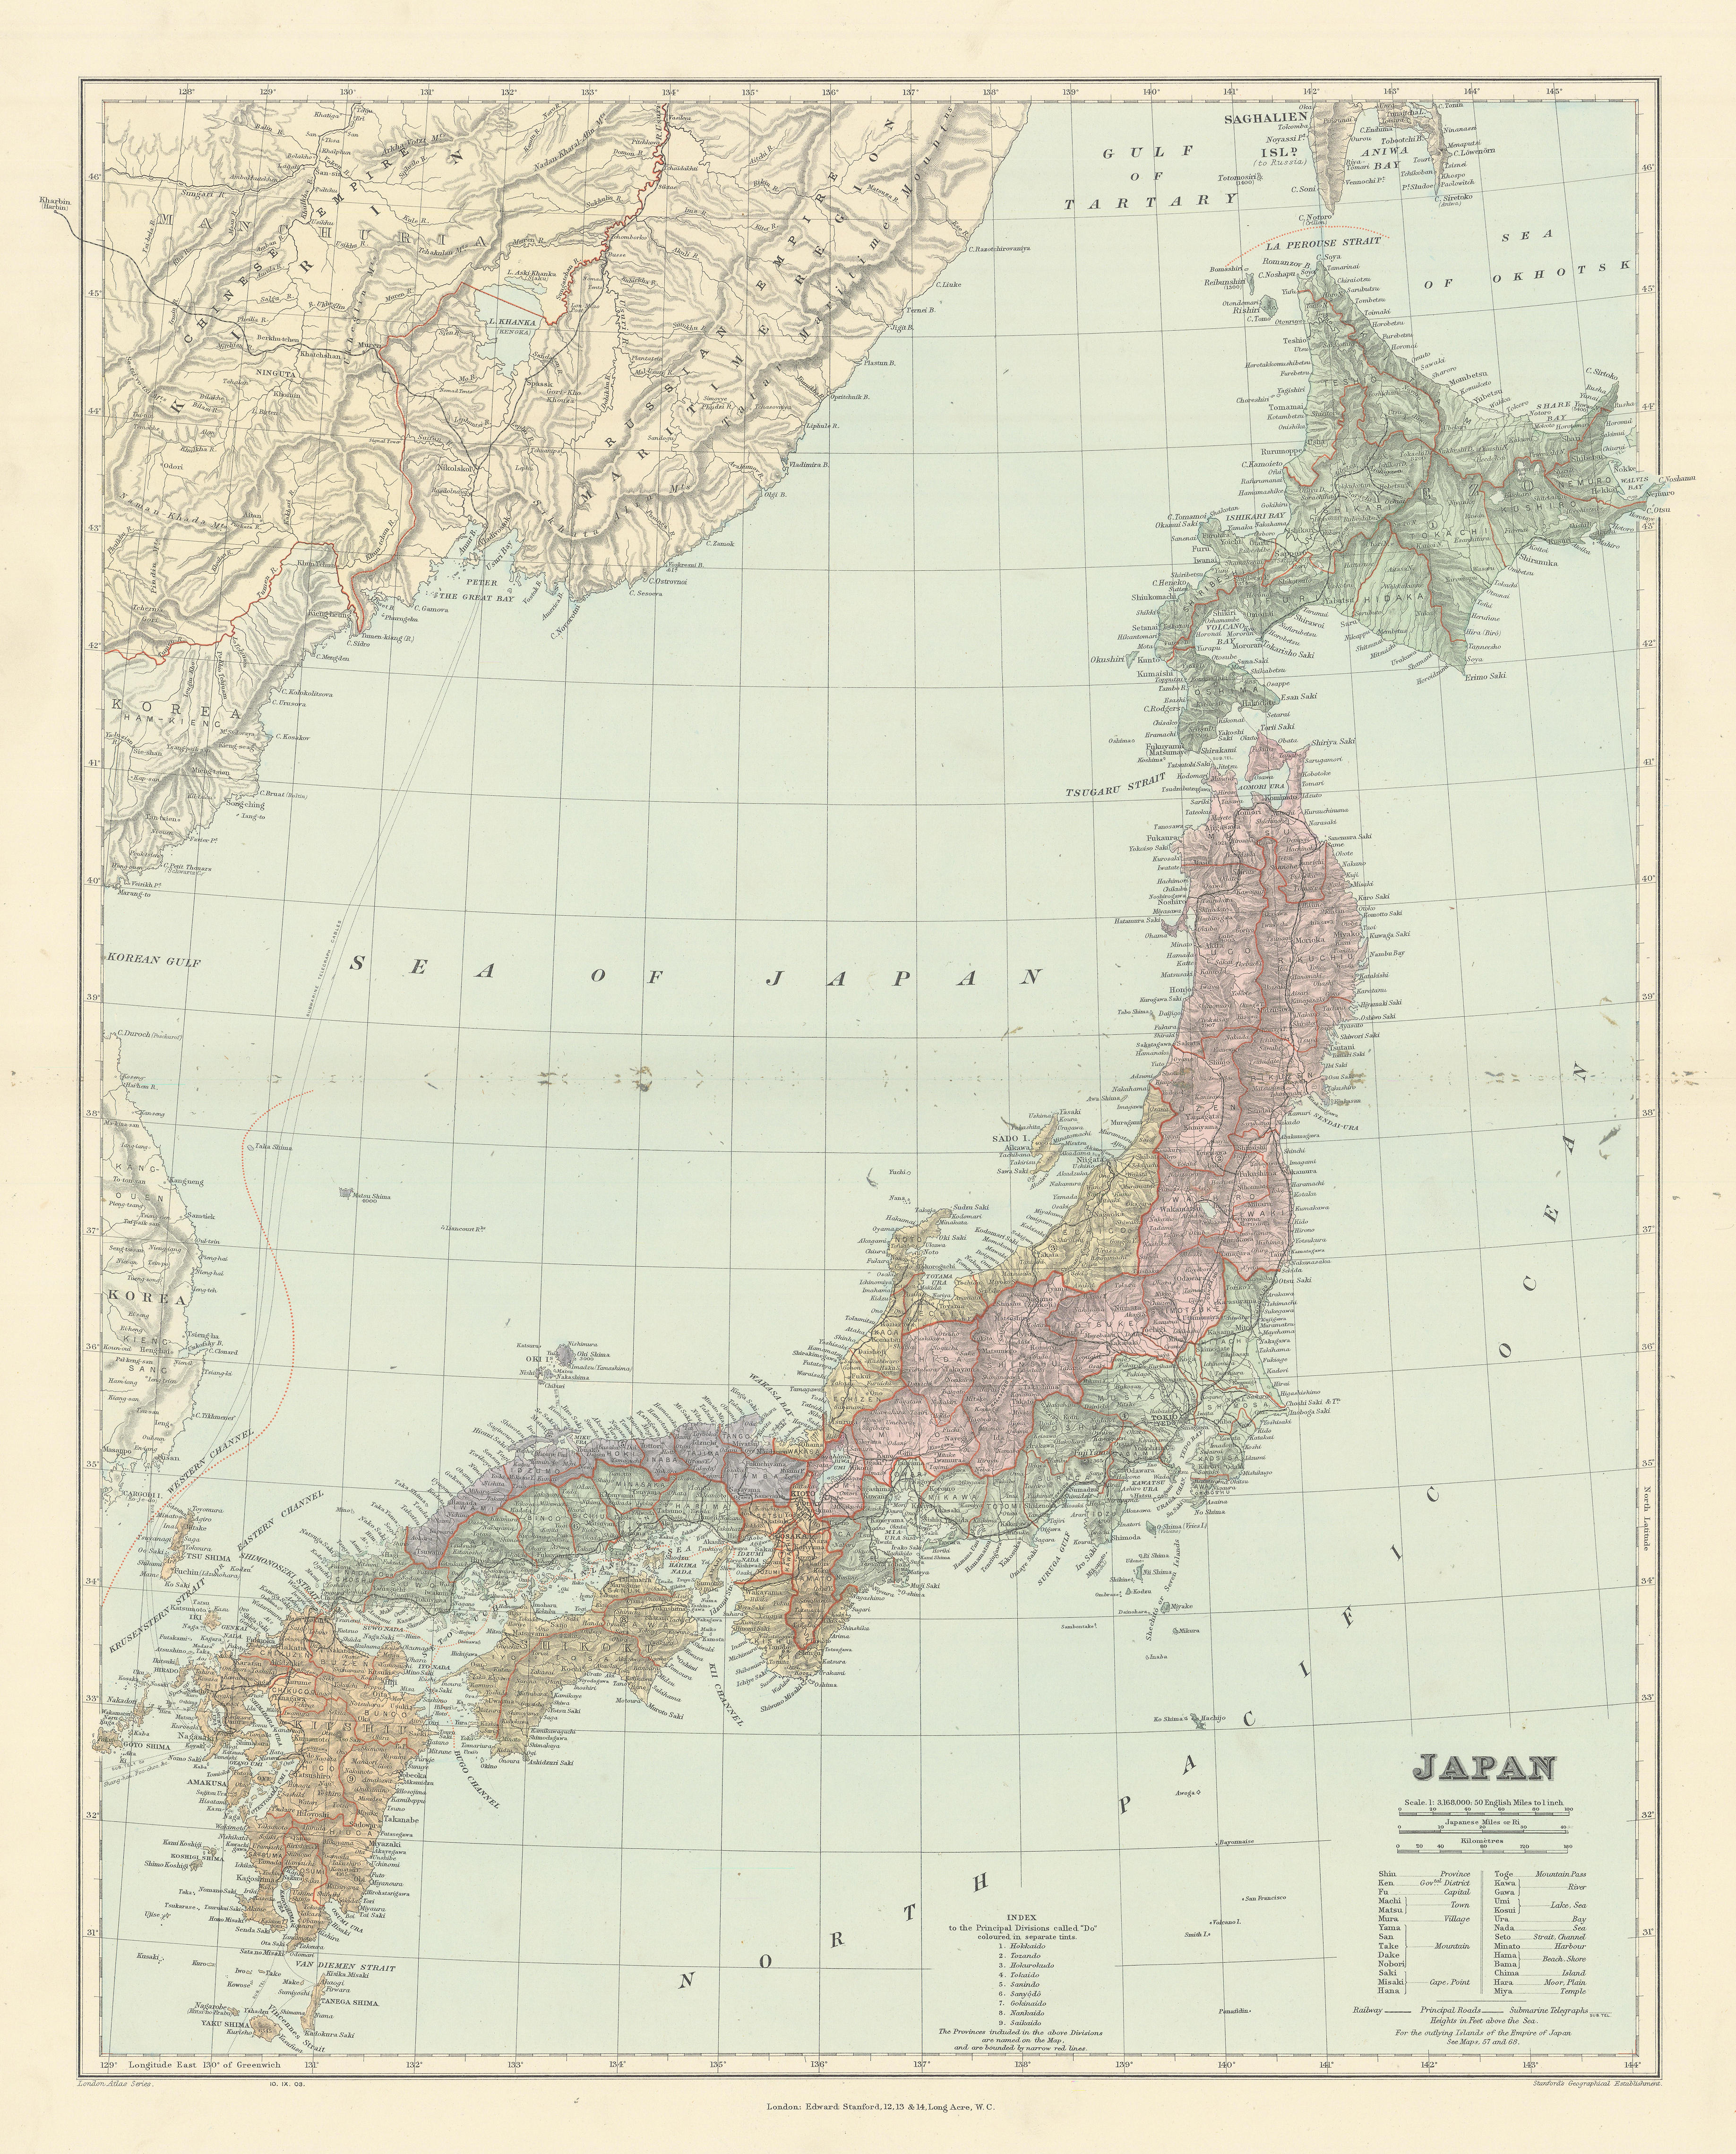 The Islands of Japan, in Provinces/prefectures. 65x52cm. STANFORD 1904 old map